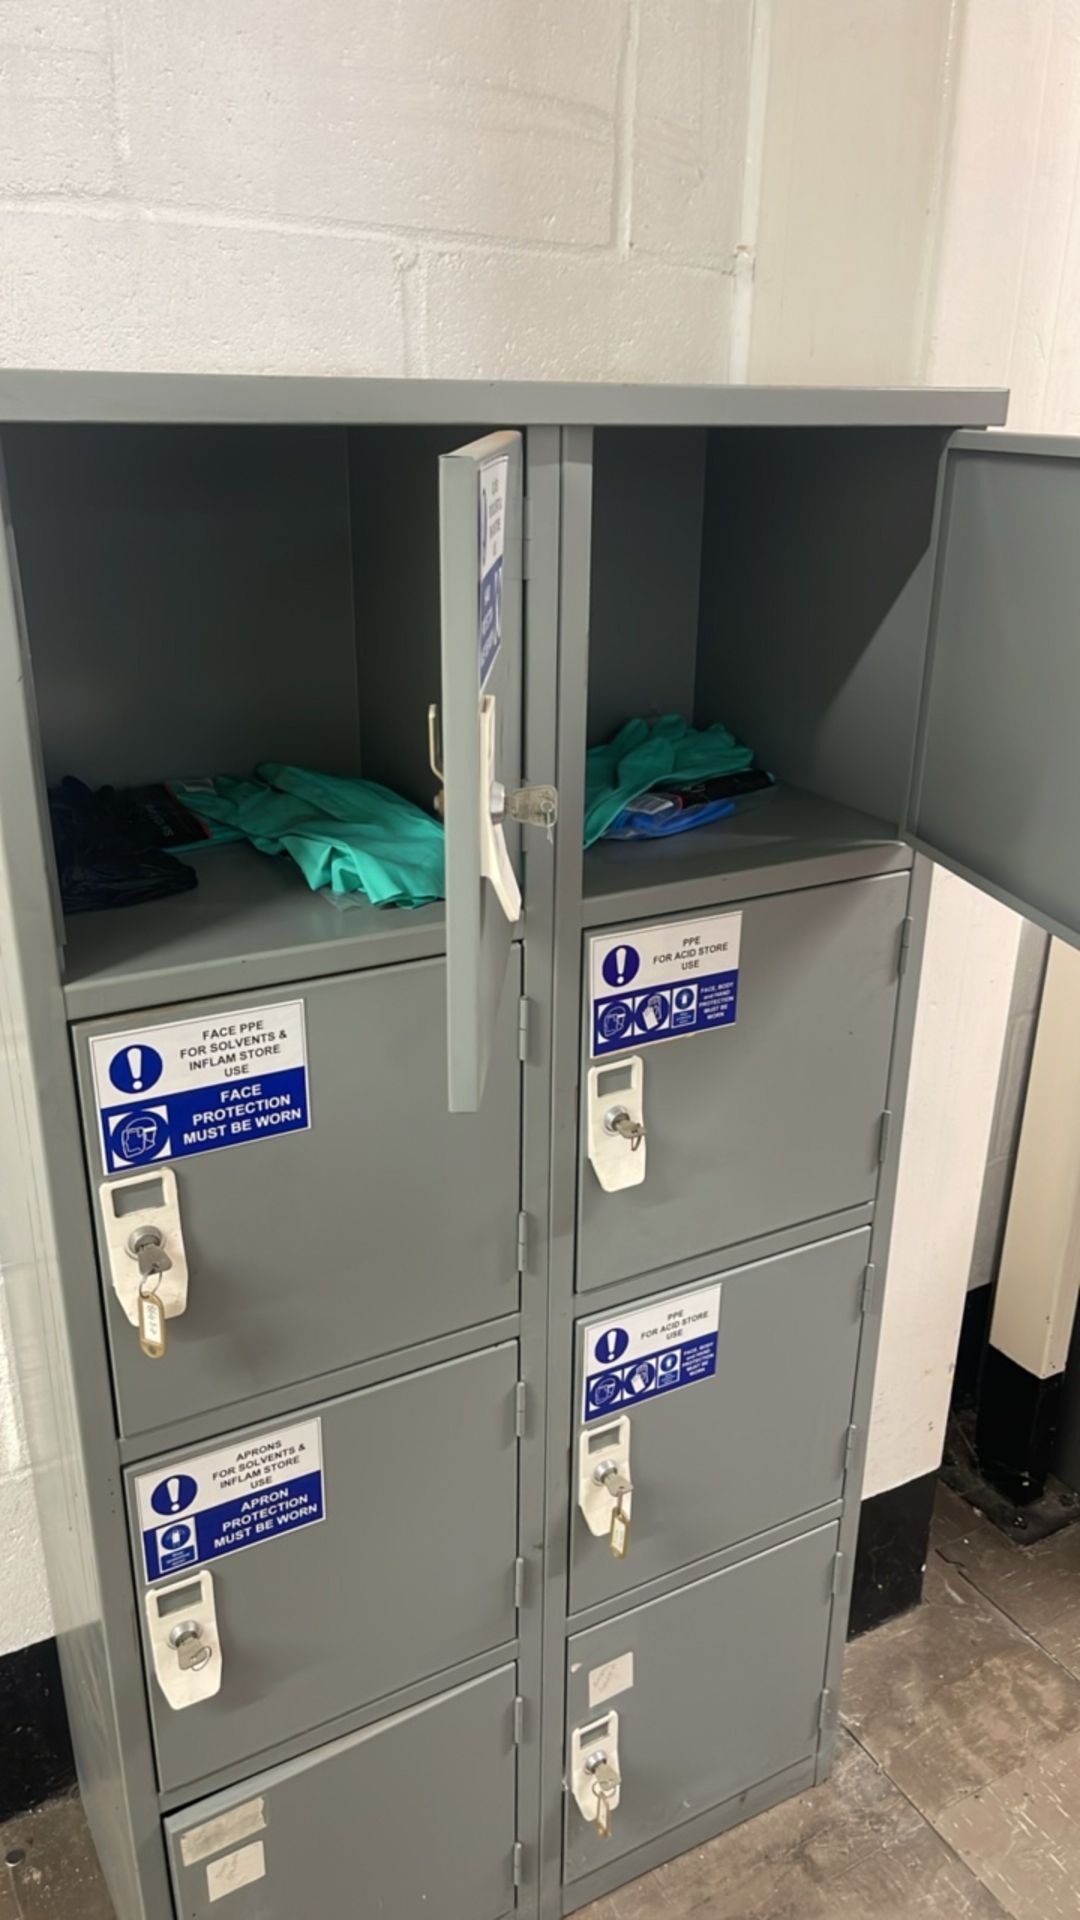 PPE Lockers - Image 4 of 4